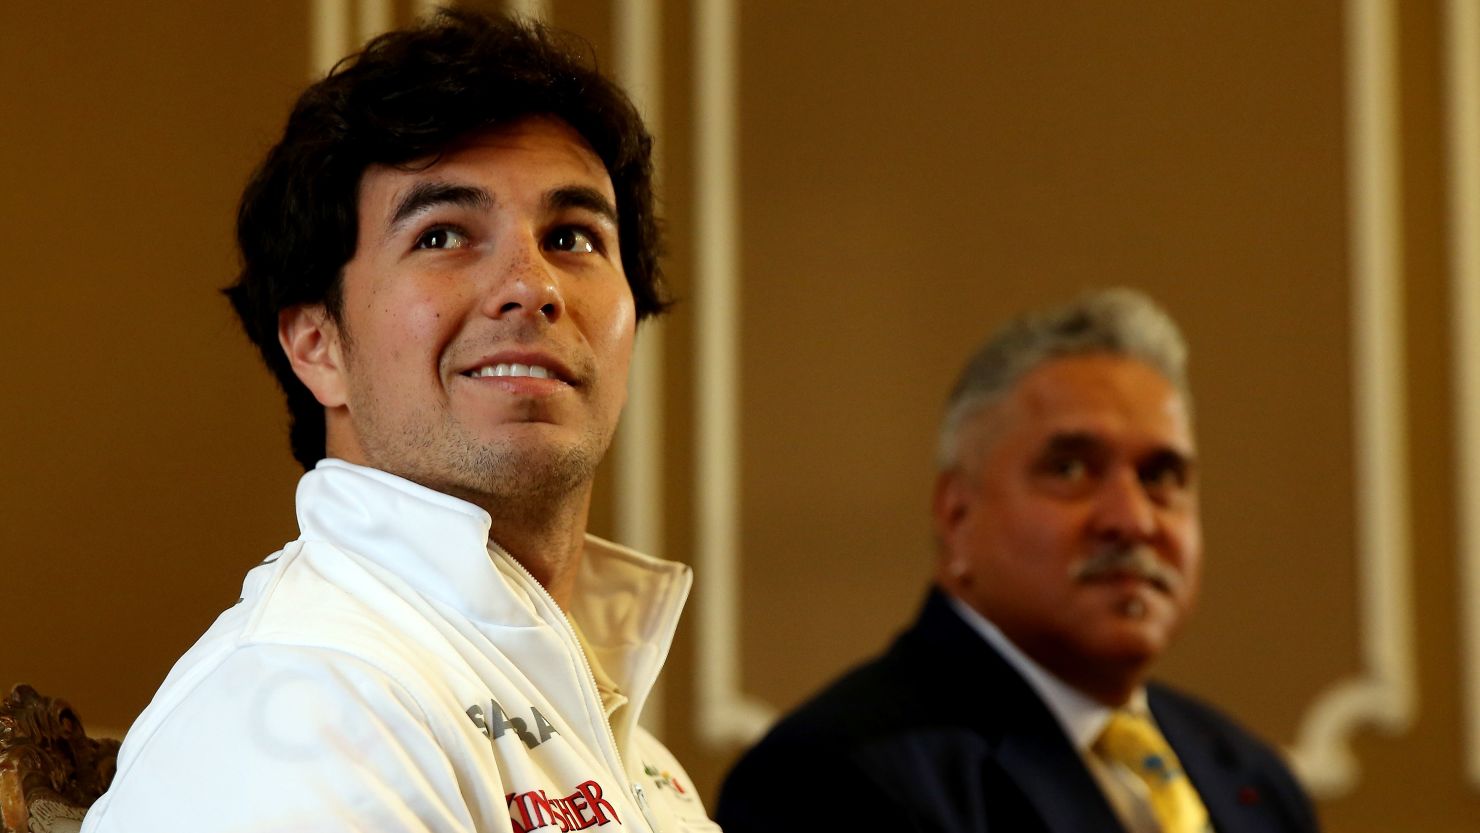 All smiles for Mexican racer Sergio Perez as he signs for Force India under the watchful eye of new boss Vijay Mallya